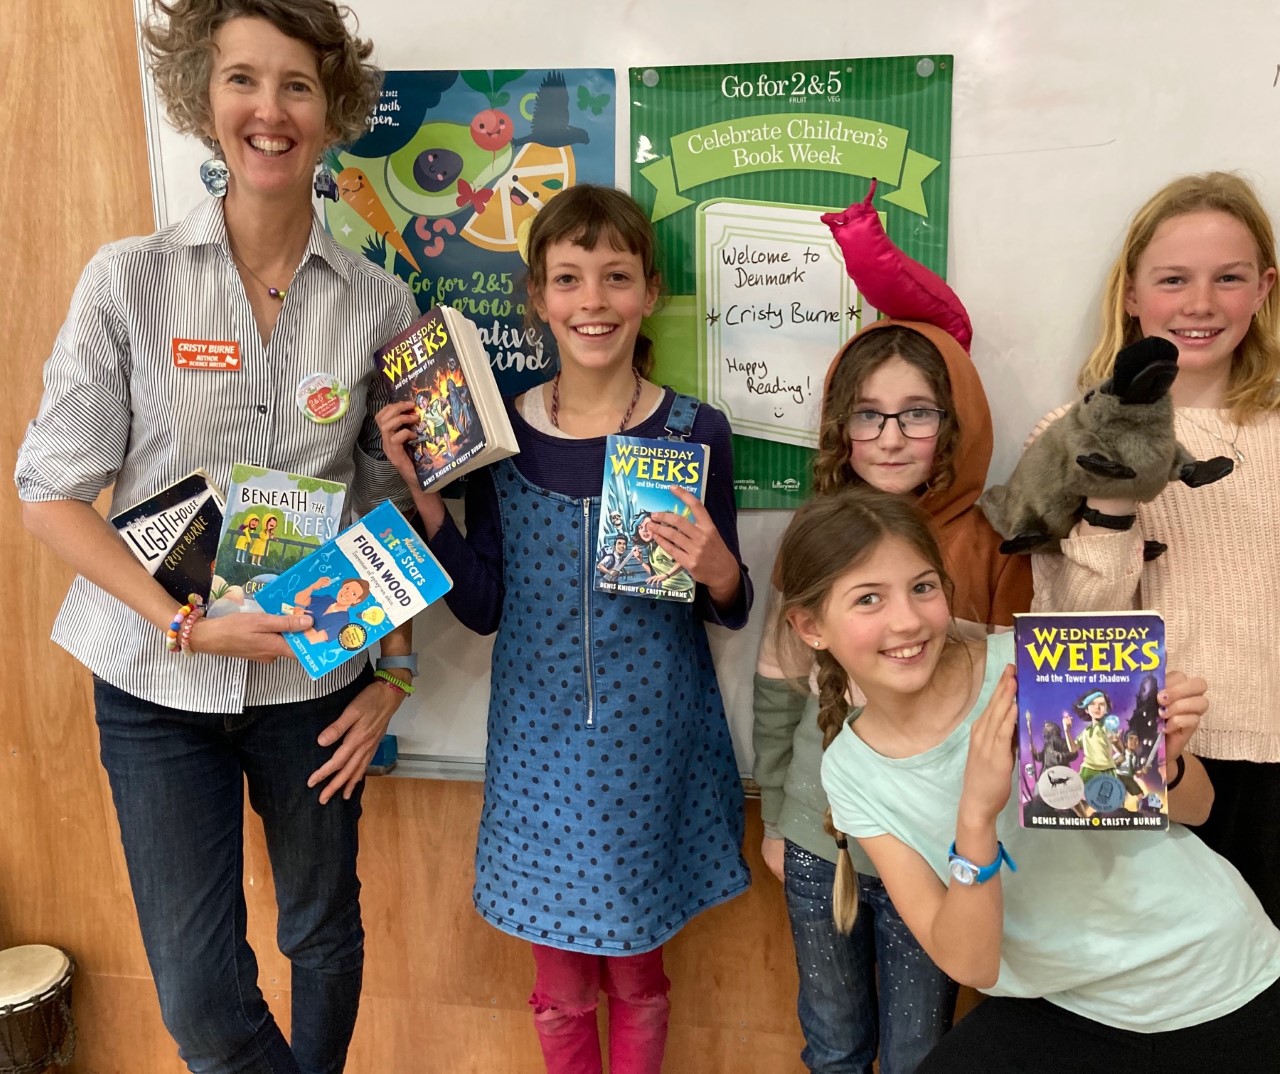 Visiting Author Inspires Kids During Book Week